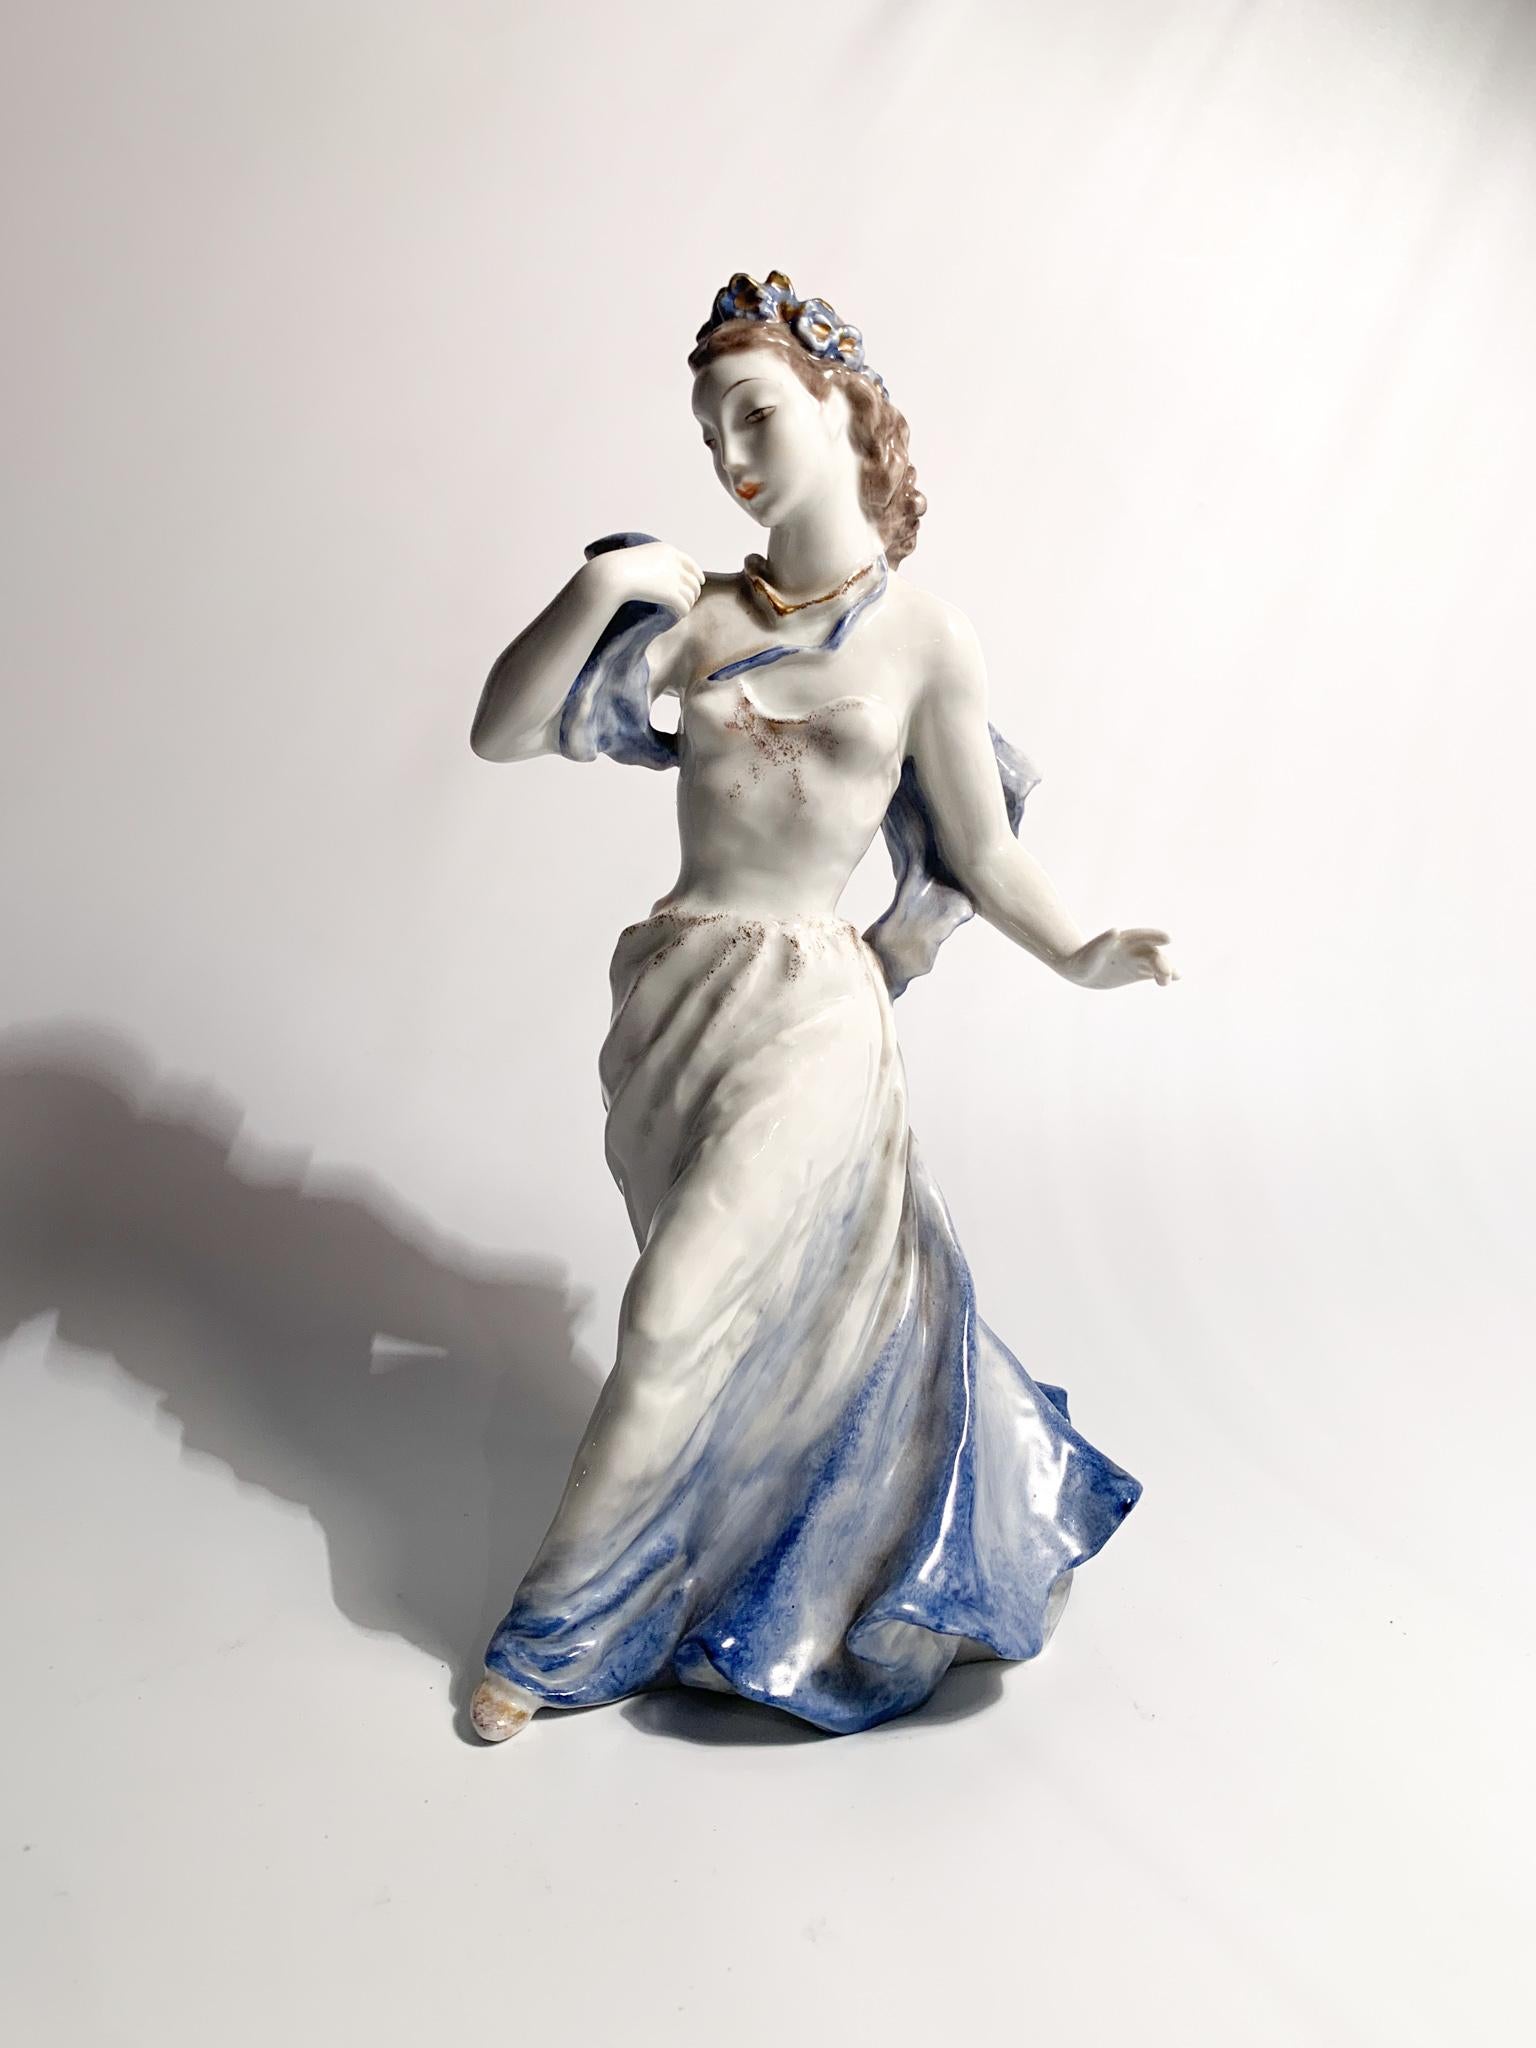 Porcelain figurine of a lady, made by Rosenthal in the 1940s

Ø cm 13 Ø cm 12 h cm 23

Rosenthal is a German company founded in 1879 in Bavaria. It produces porcelain and tableware. Since 2009, it has been owned by Sambonet Paderno Industrie, an